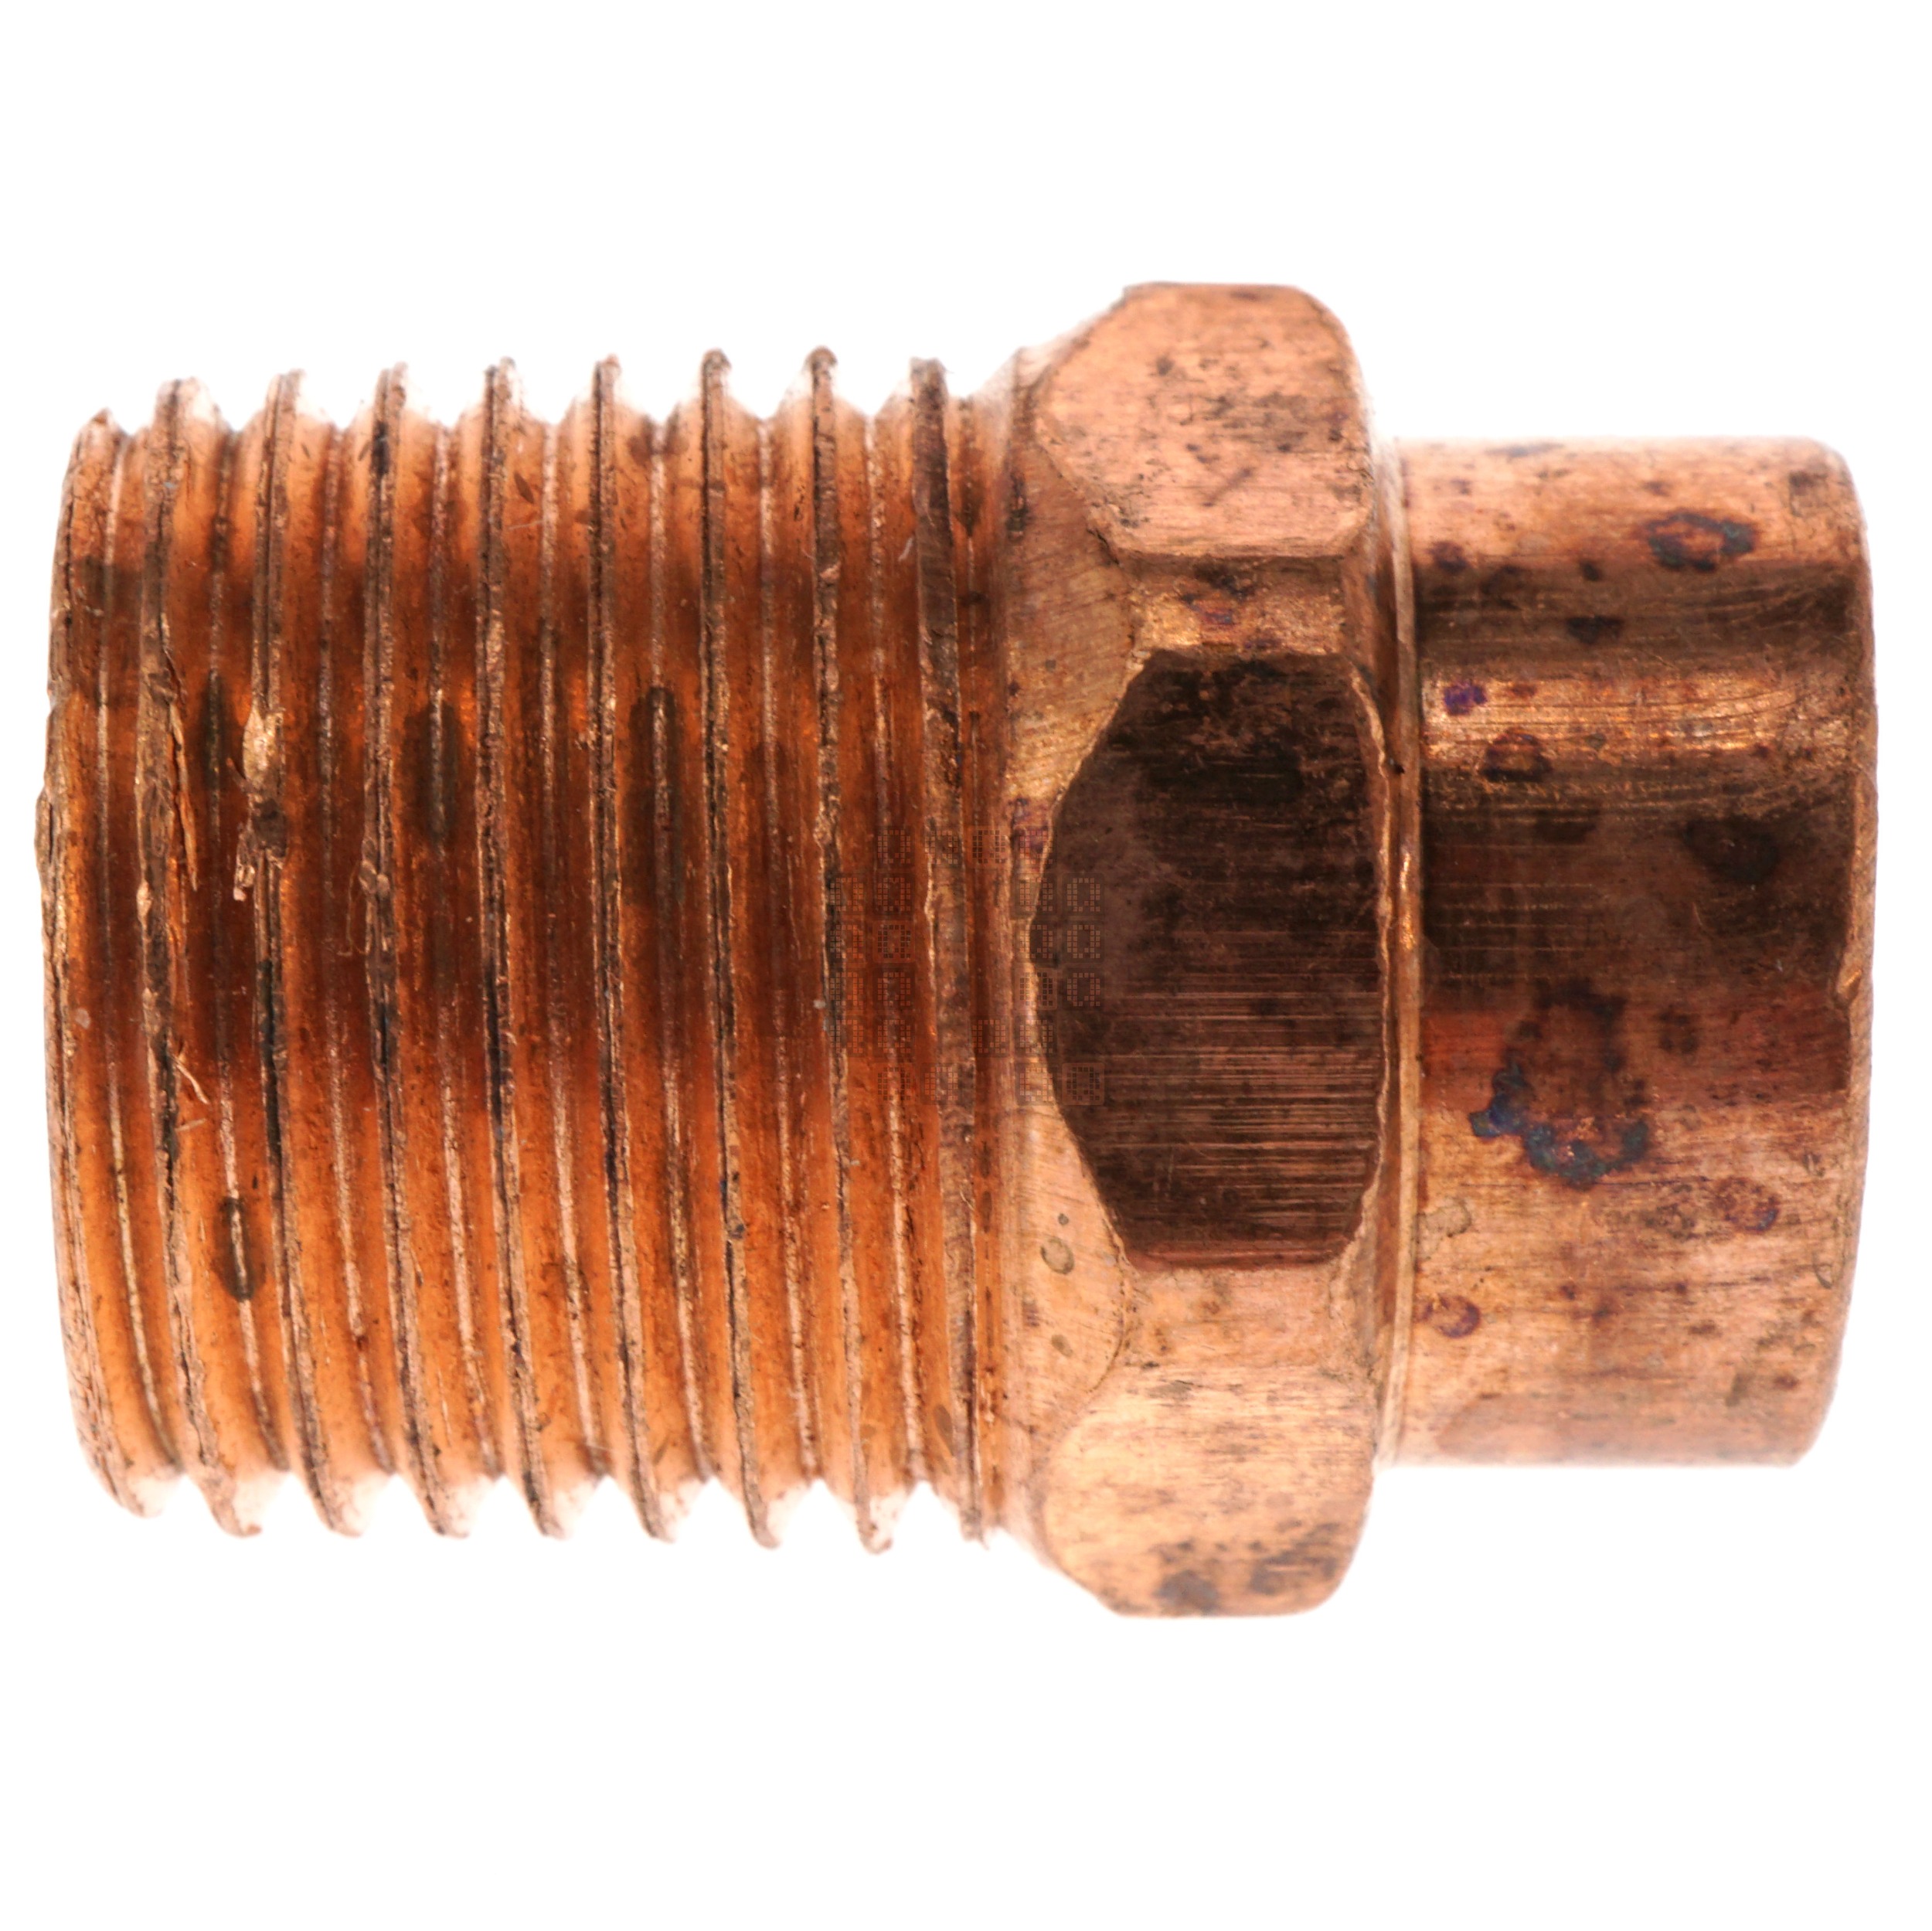 Elkhart Products 10030310 Copper Pipe Adapter, 1/2 " Male NPT to 1/2" Sweat